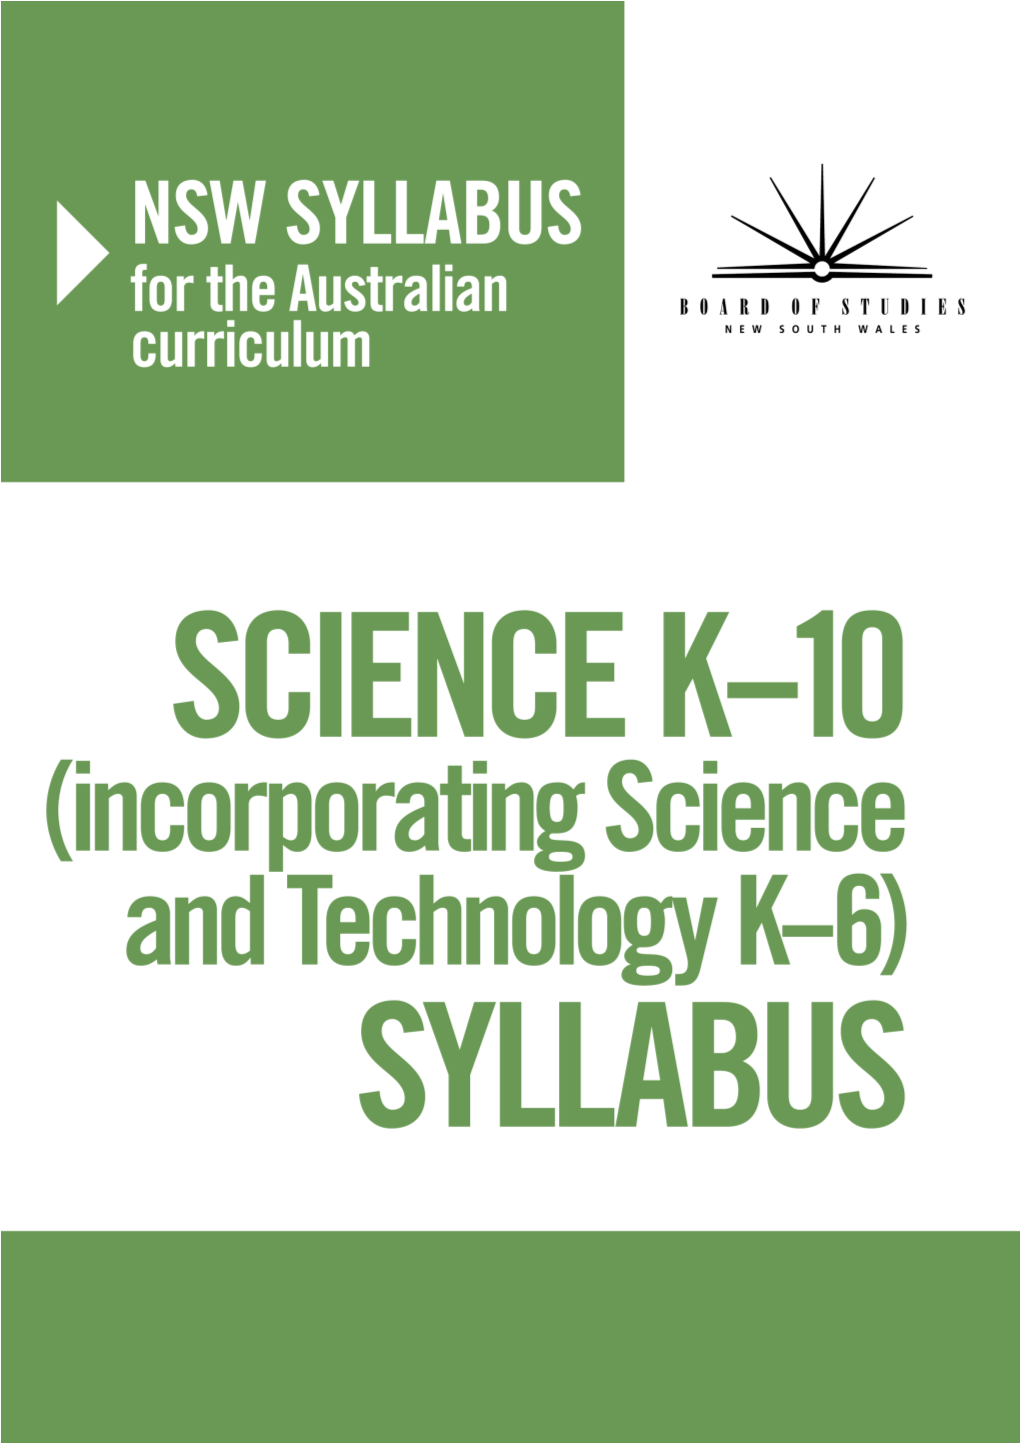 Science K-10 (Incorporating Science and Technology K-6) Syllabus 2012